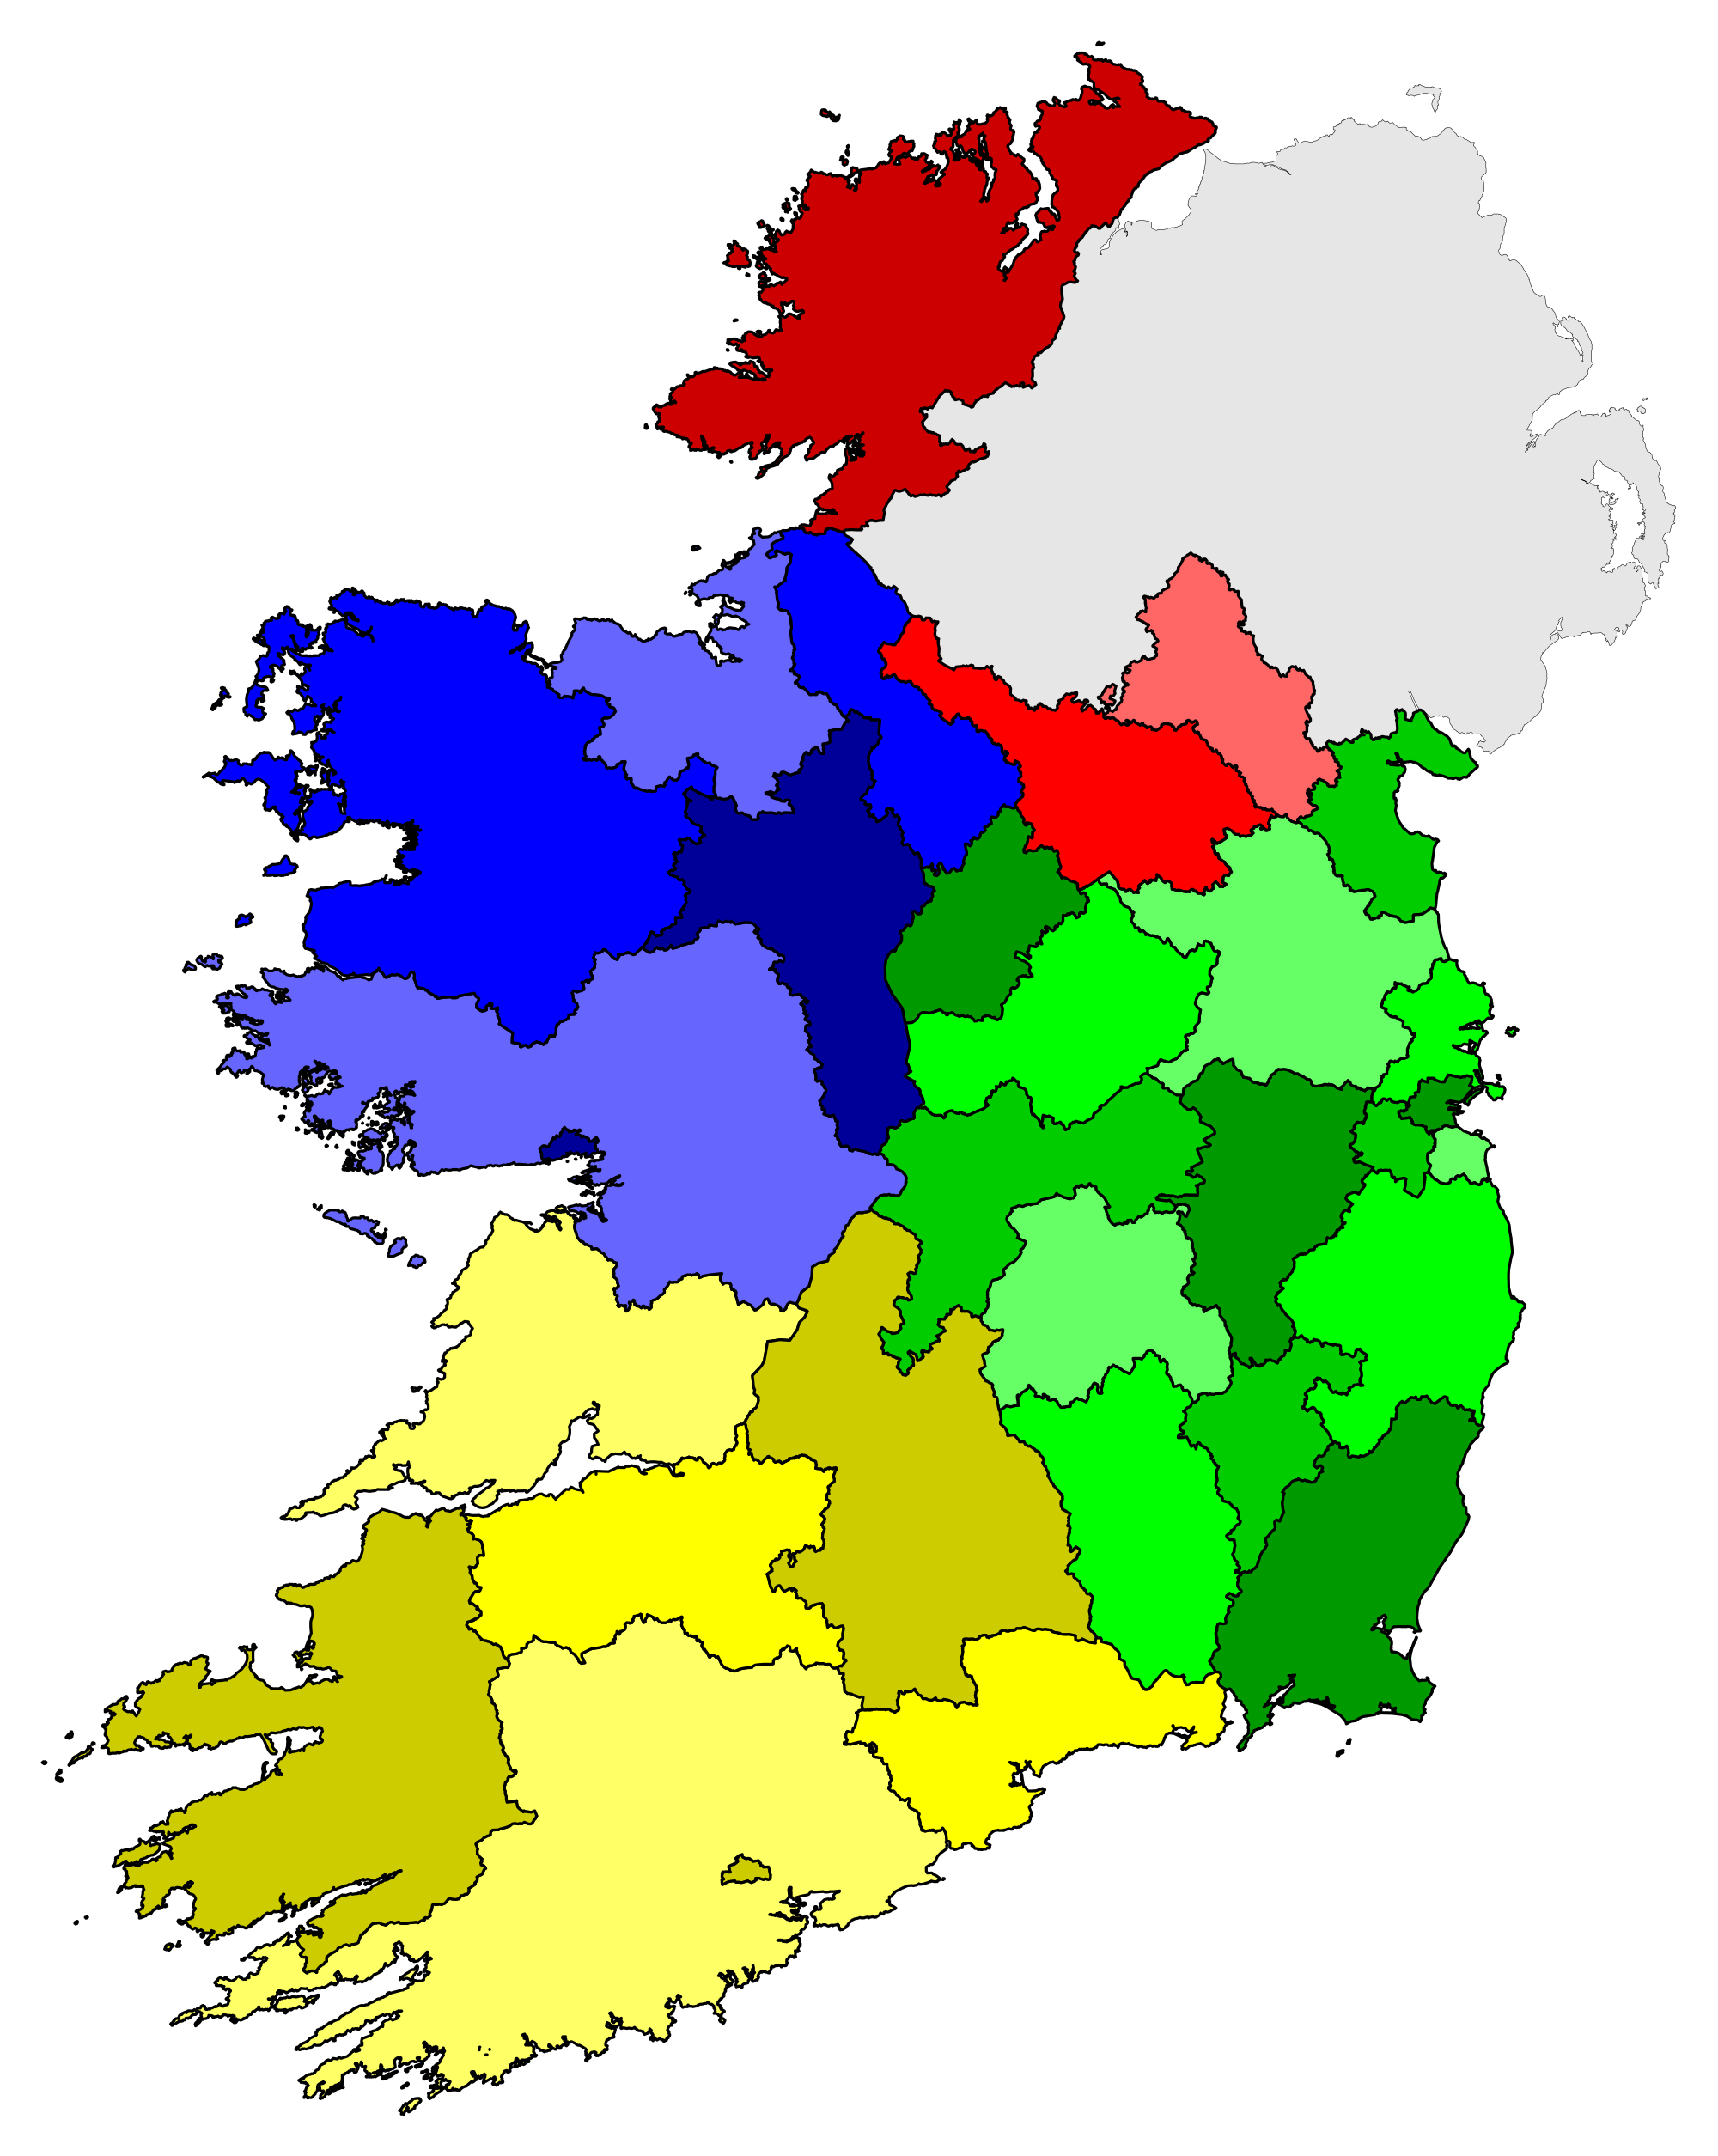 File:Republic of Ireland counties and cities.svg